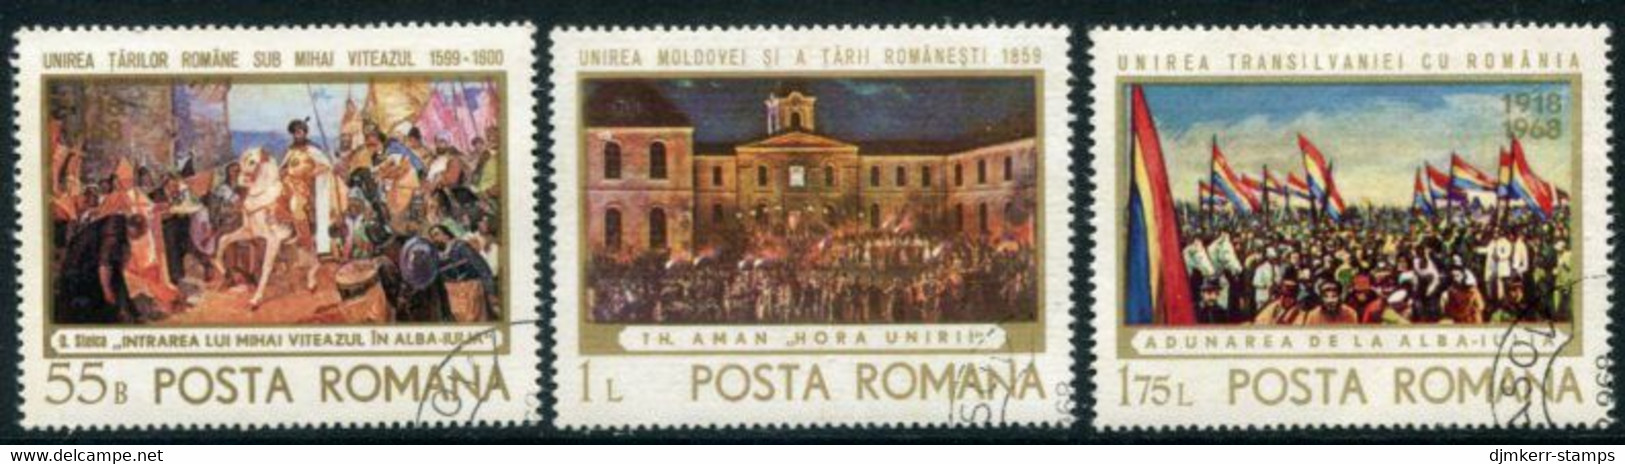 ROMANIA 1968 Anniversary Of Incorporation Of Transylvania  Used.   Michel 2721-23 - Used Stamps